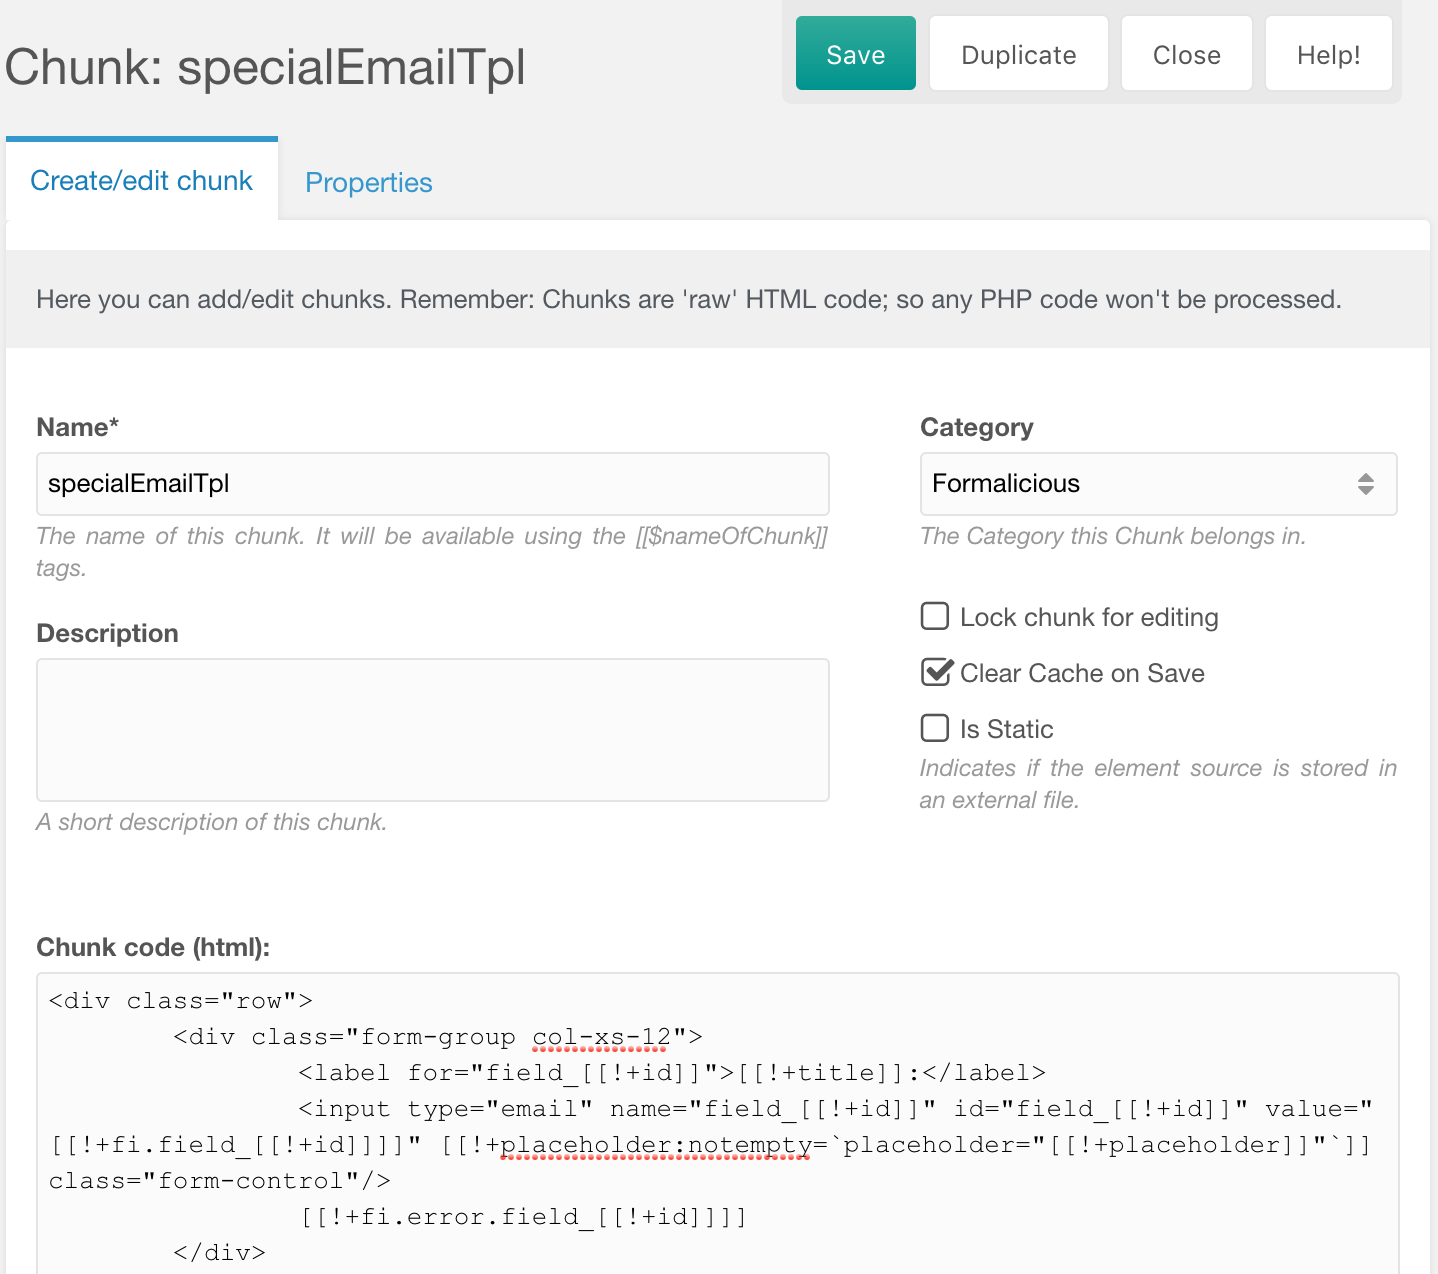 specialEmailTpl chunk for a Formalicious email-field